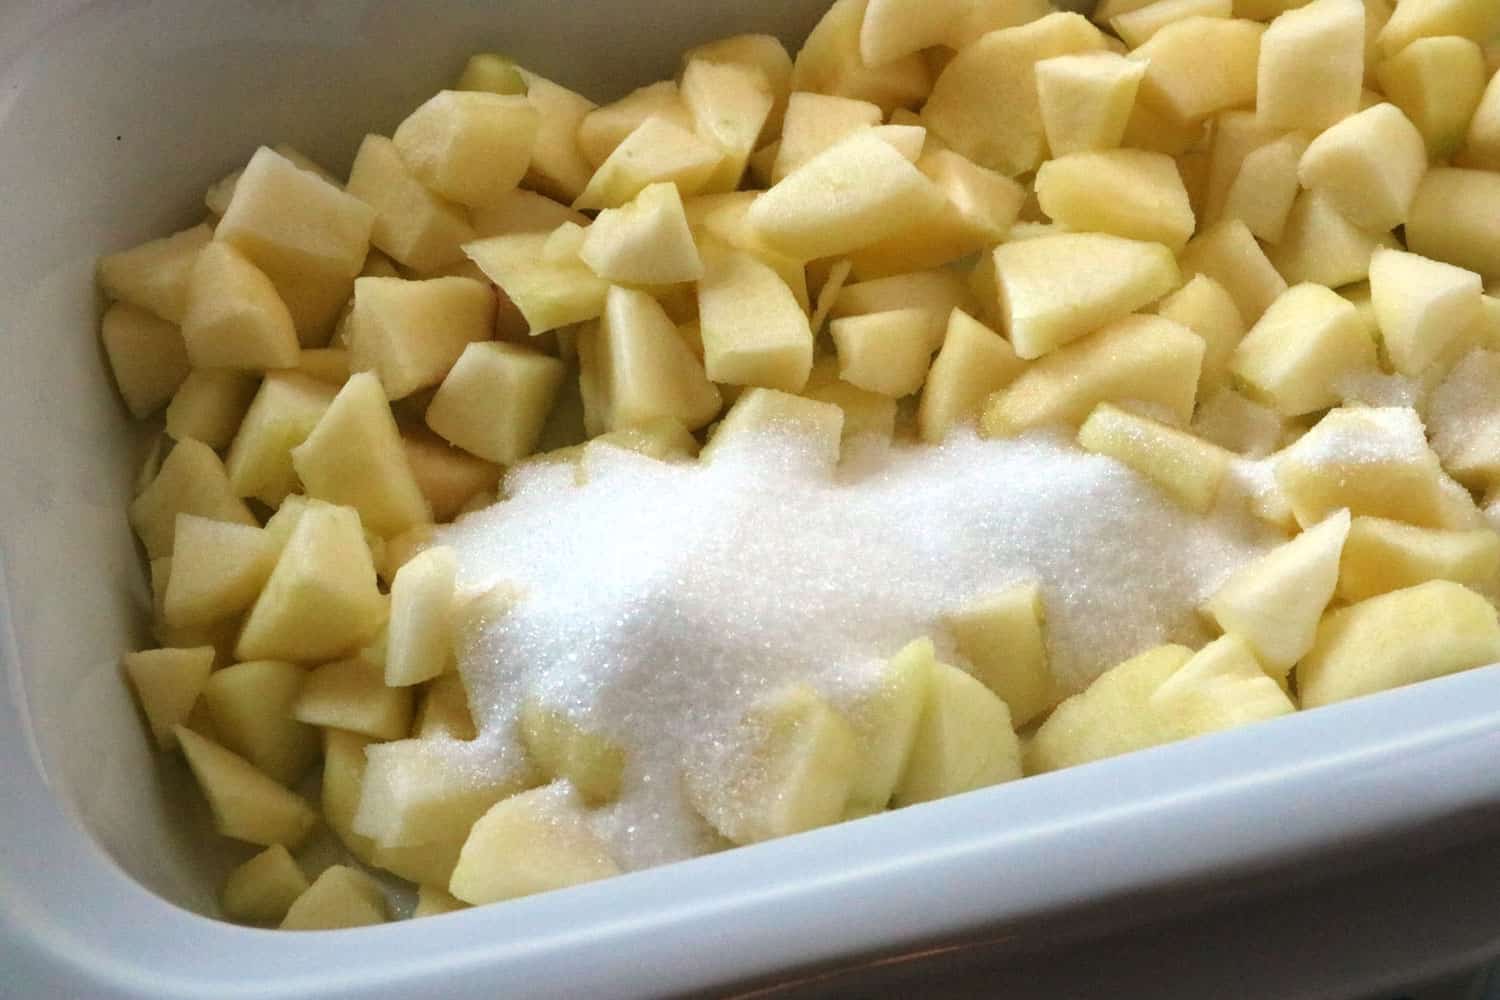 Diced apples and sugar in slow cooker for bread pudding recipe.